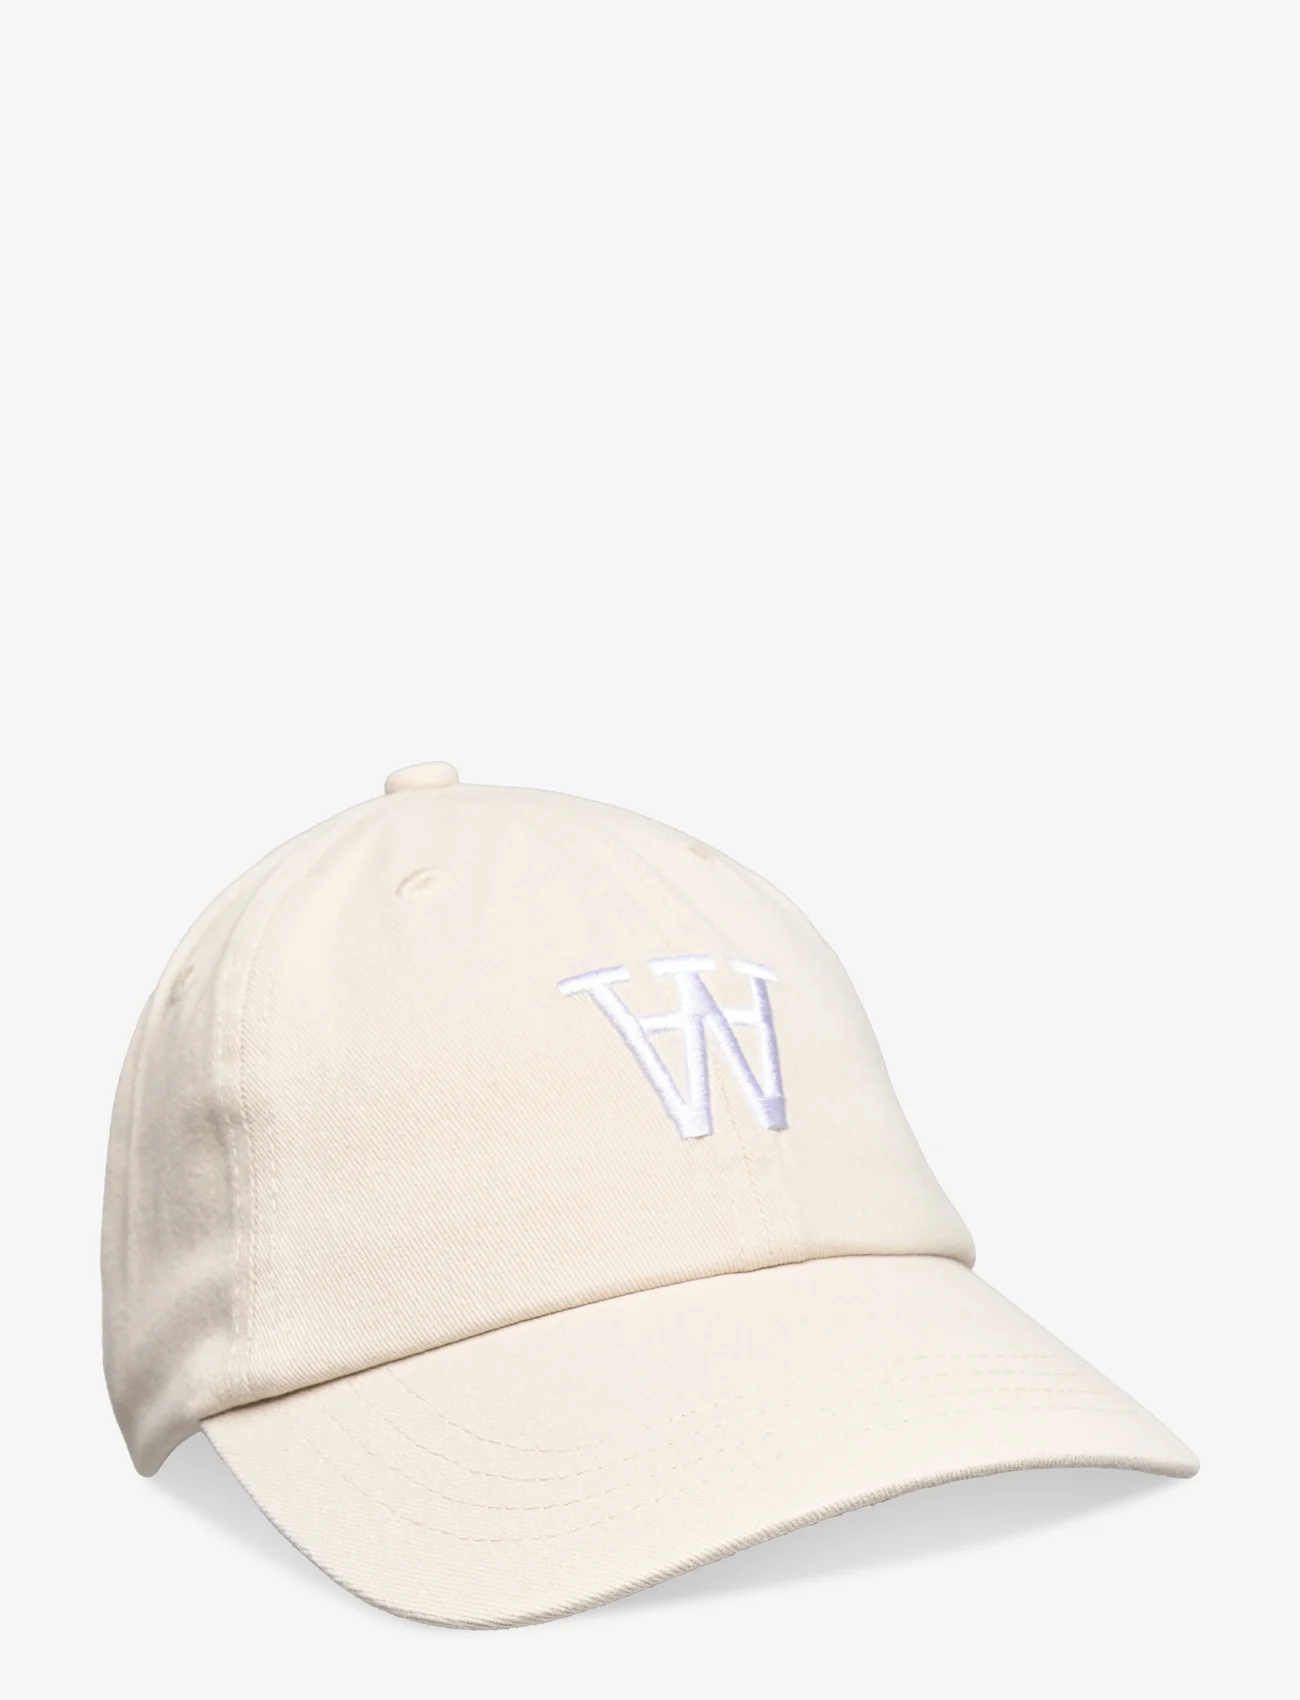 Double A by Wood Wood - Eli AA cap - caps - off-white - 0